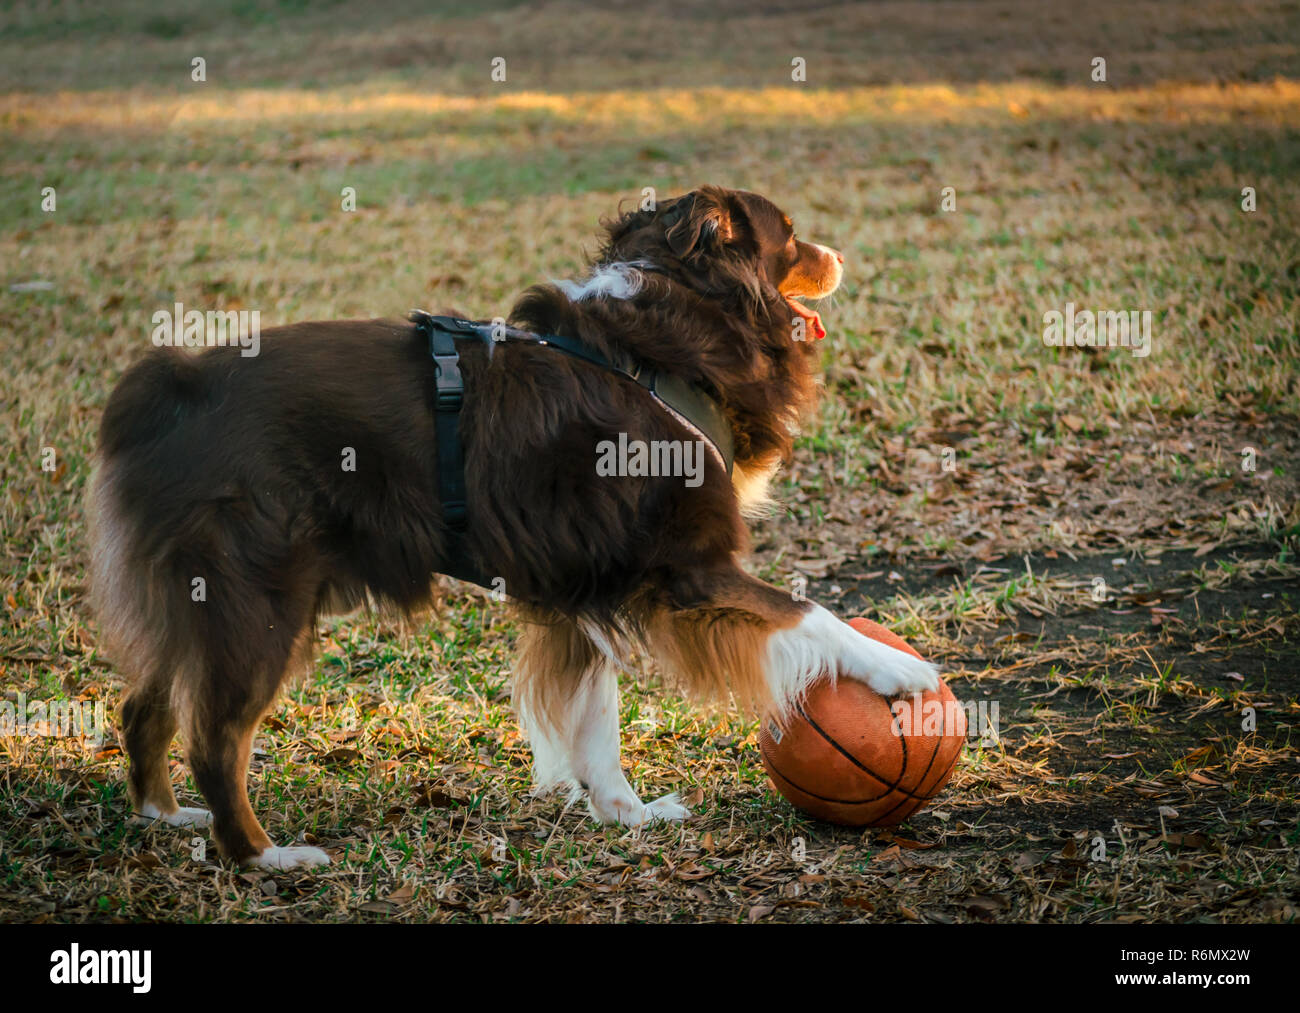 Cowboy, a six-year-old Australian Shepherd, takes a timeout from playing basketball, March 1, 2014, in Coden, Alabama. Stock Photo